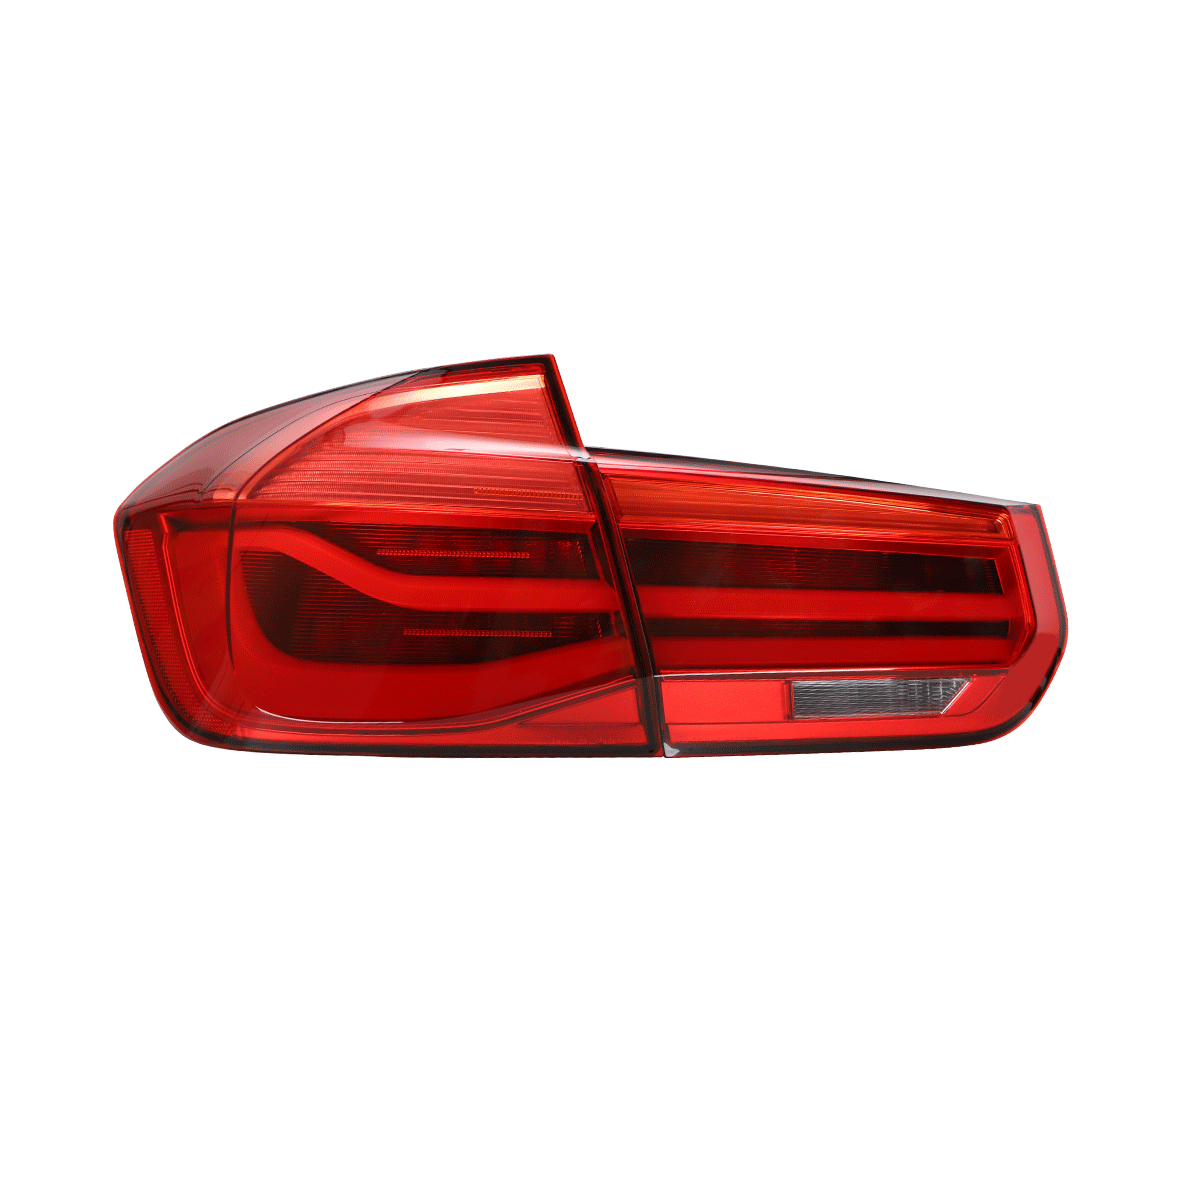 Luminosa LCI Style LED Tail Light Red suit BMW M3 F80 & 3 Series F30 - MODE Auto Concepts